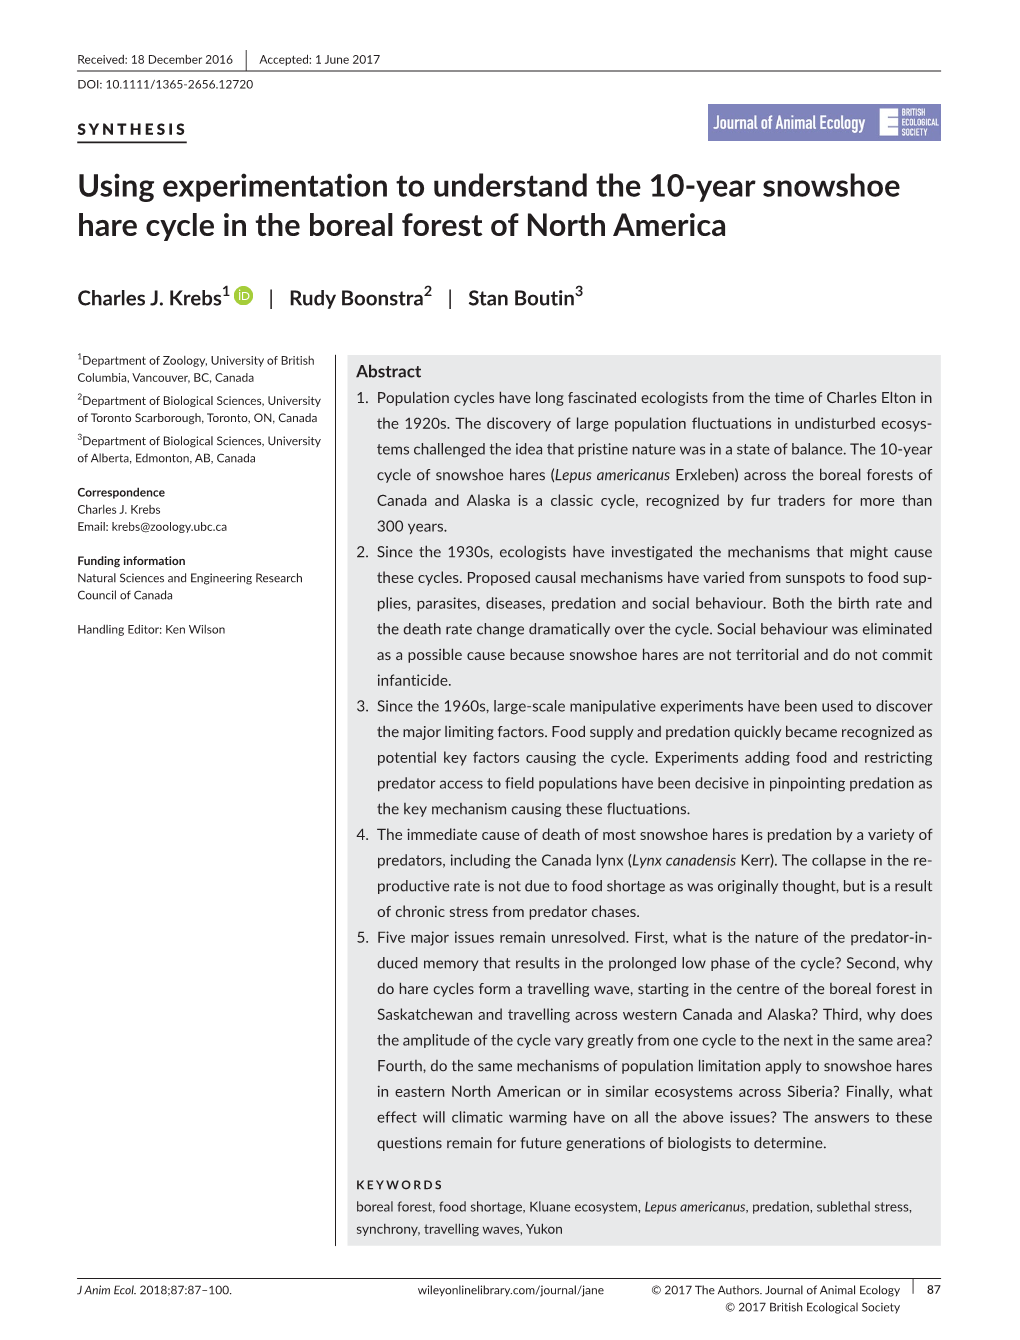 Using Experimentation to Understand the 10‐Year Snowshoe Hare Cycle In